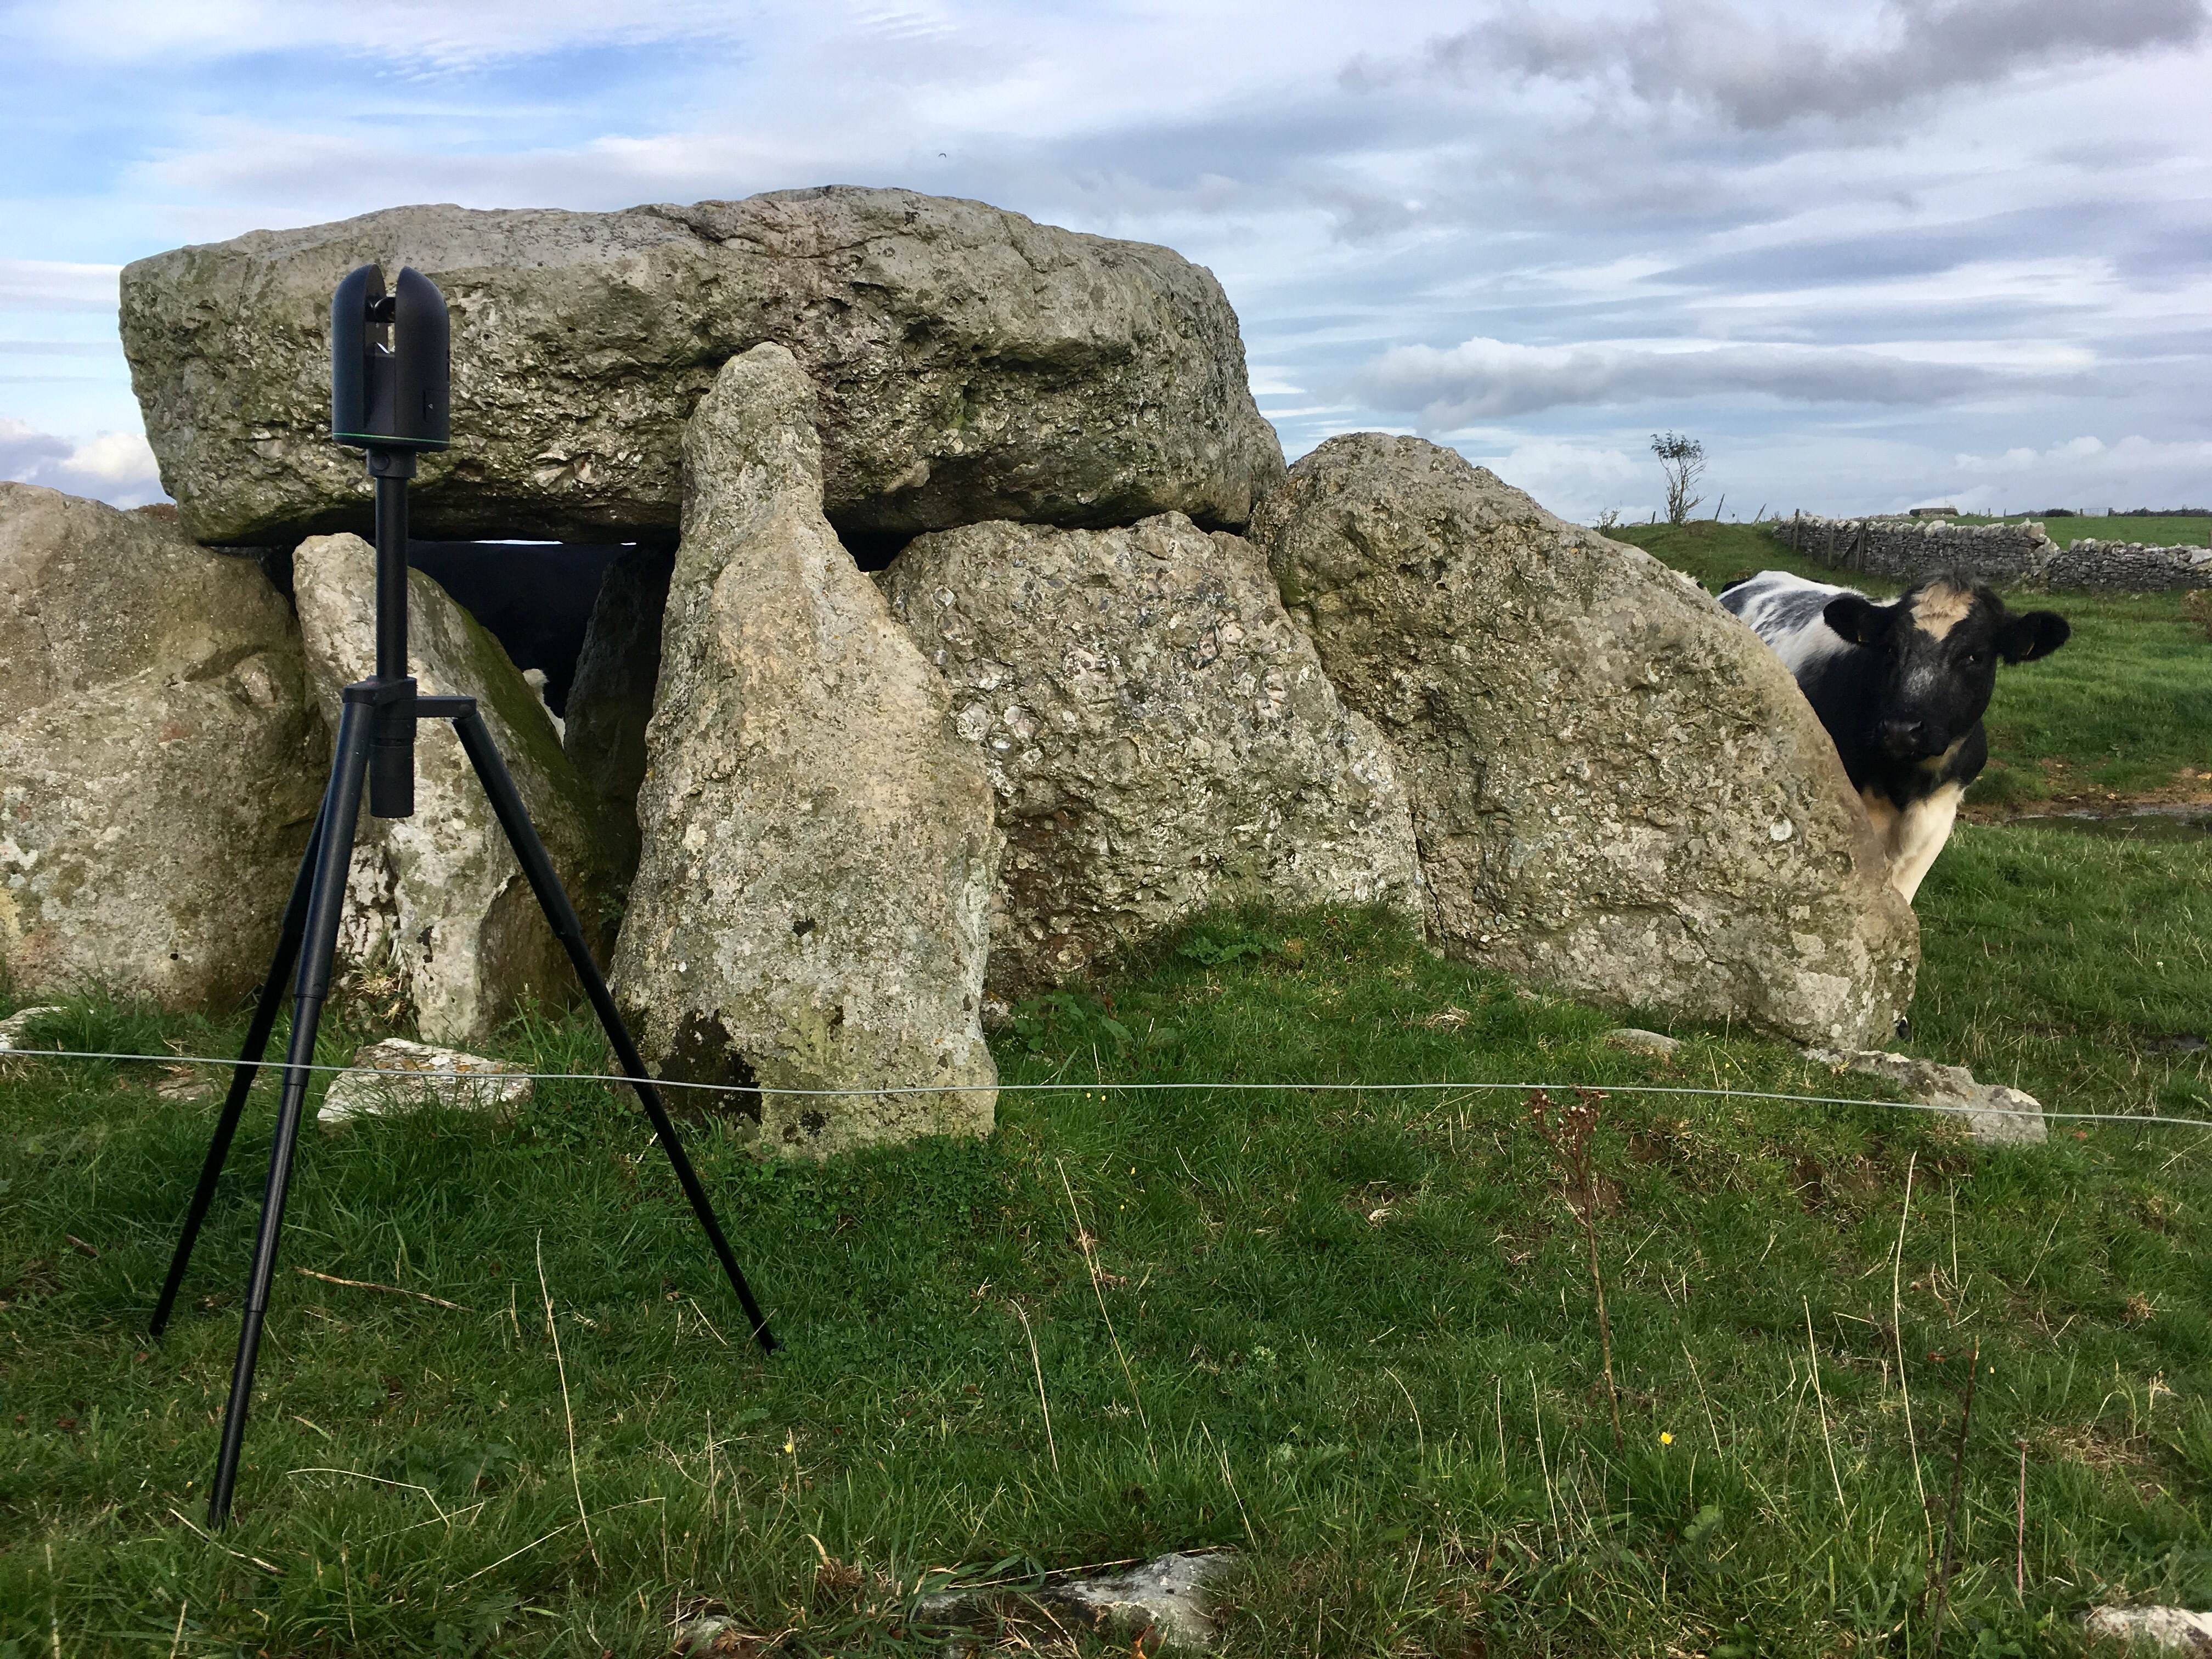 Leica BLK360 in field with a cow